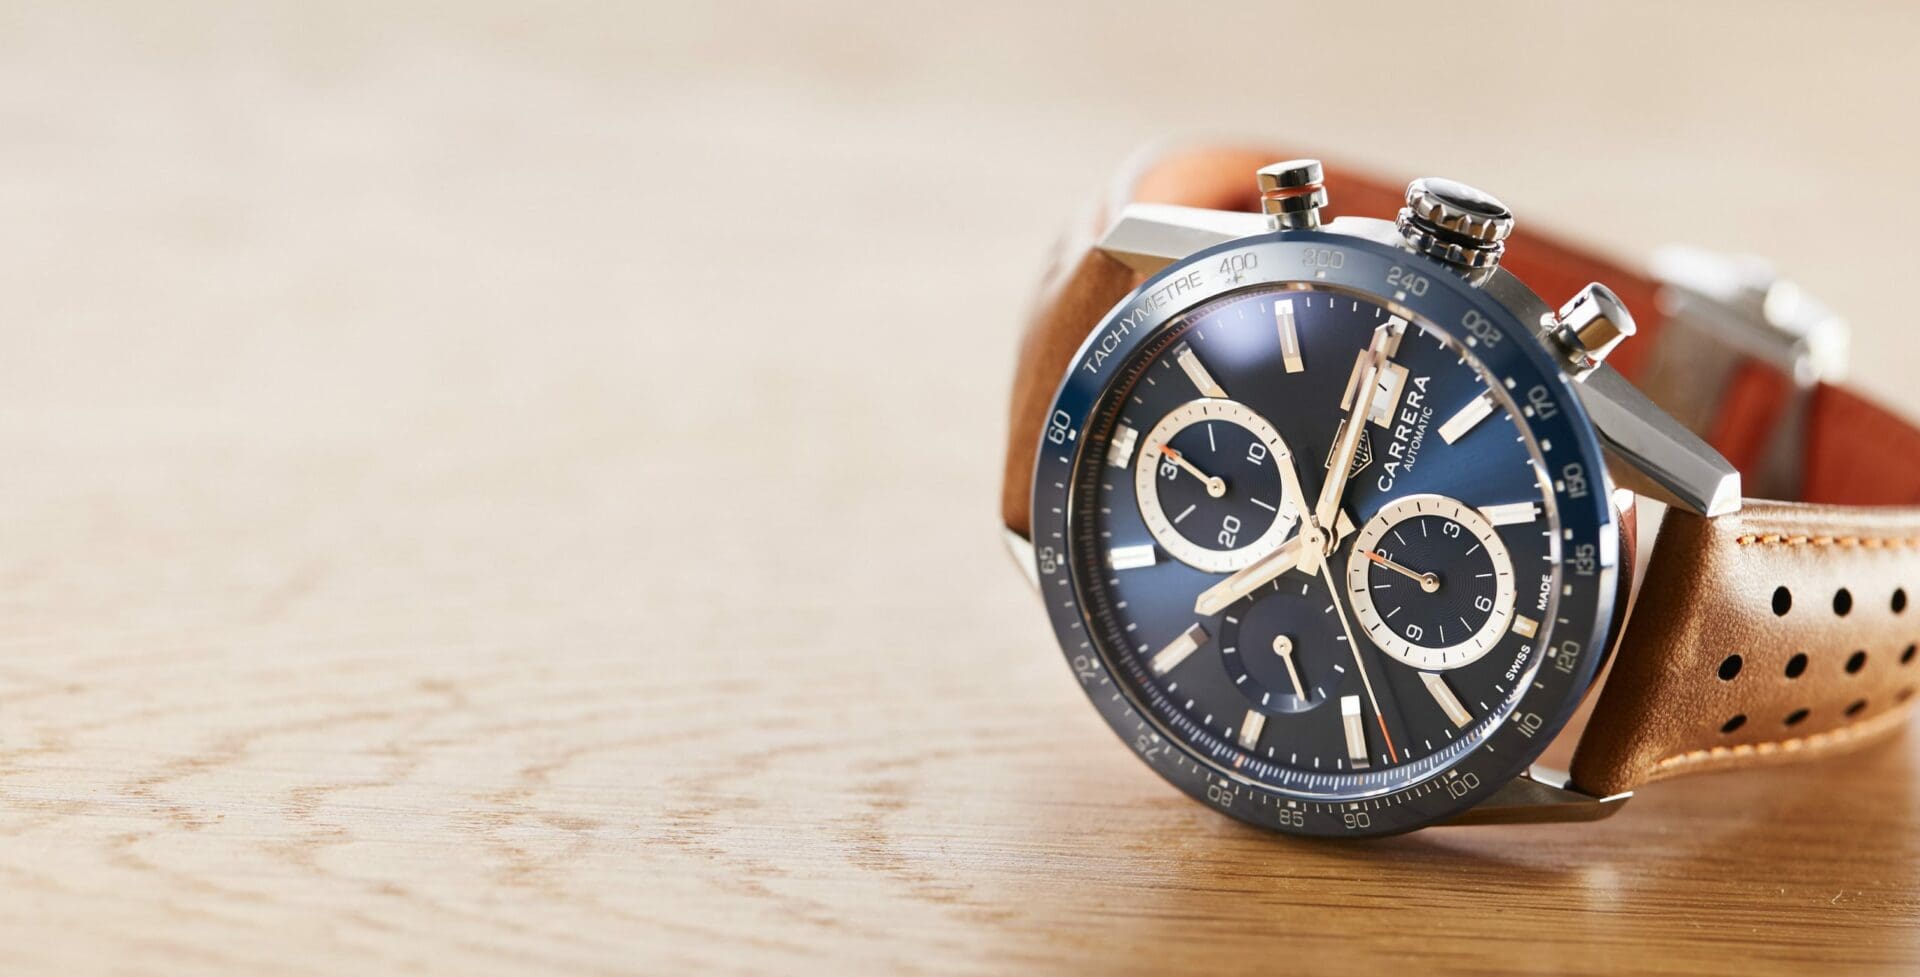 IN-DEPTH: The TAG Heuer Carrera Calibre 16 blue dial - Time and Tide Watches